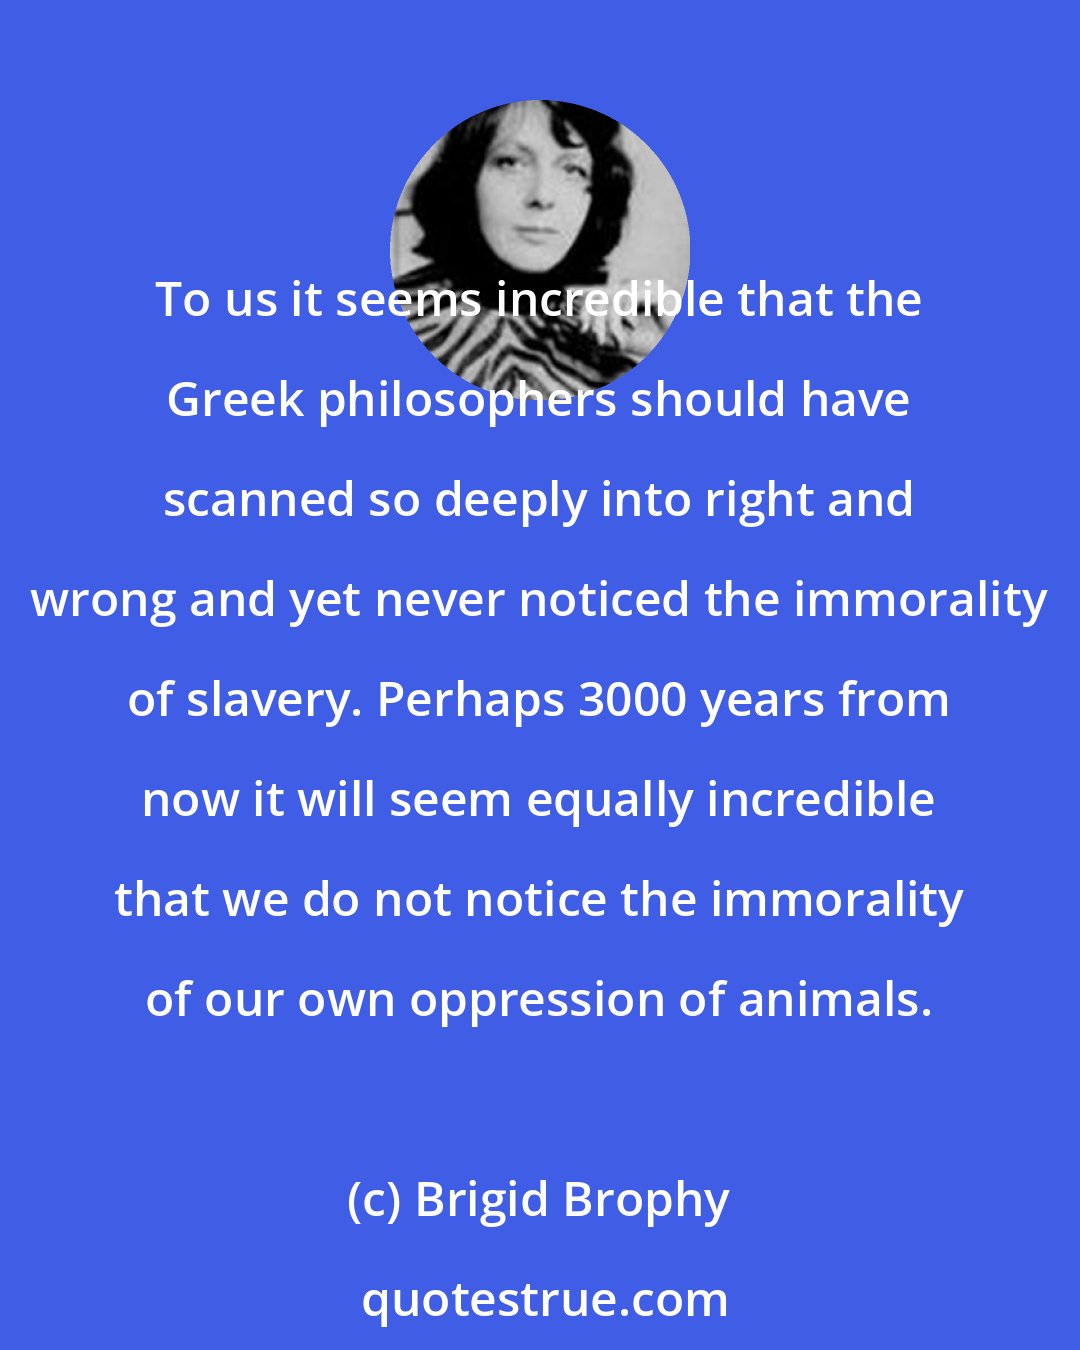 Brigid Brophy: To us it seems incredible that the Greek philosophers should have scanned so deeply into right and wrong and yet never noticed the immorality of slavery. Perhaps 3000 years from now it will seem equally incredible that we do not notice the immorality of our own oppression of animals.